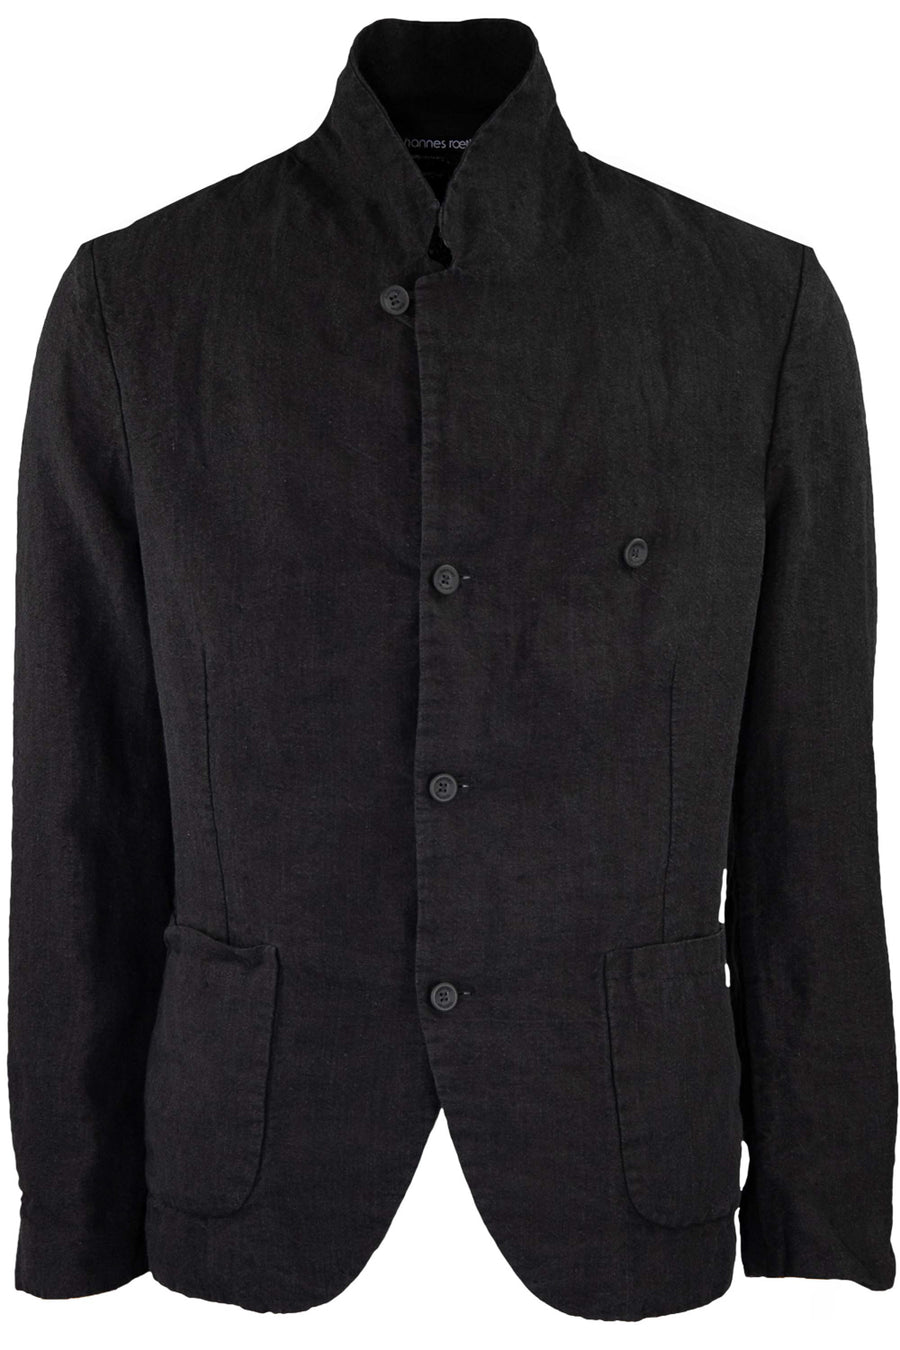 Buy the Hannes Roether Textured Linen Blazer in Black at Intro. Spend £50 for free UK delivery. Official stockists. We ship worldwide.